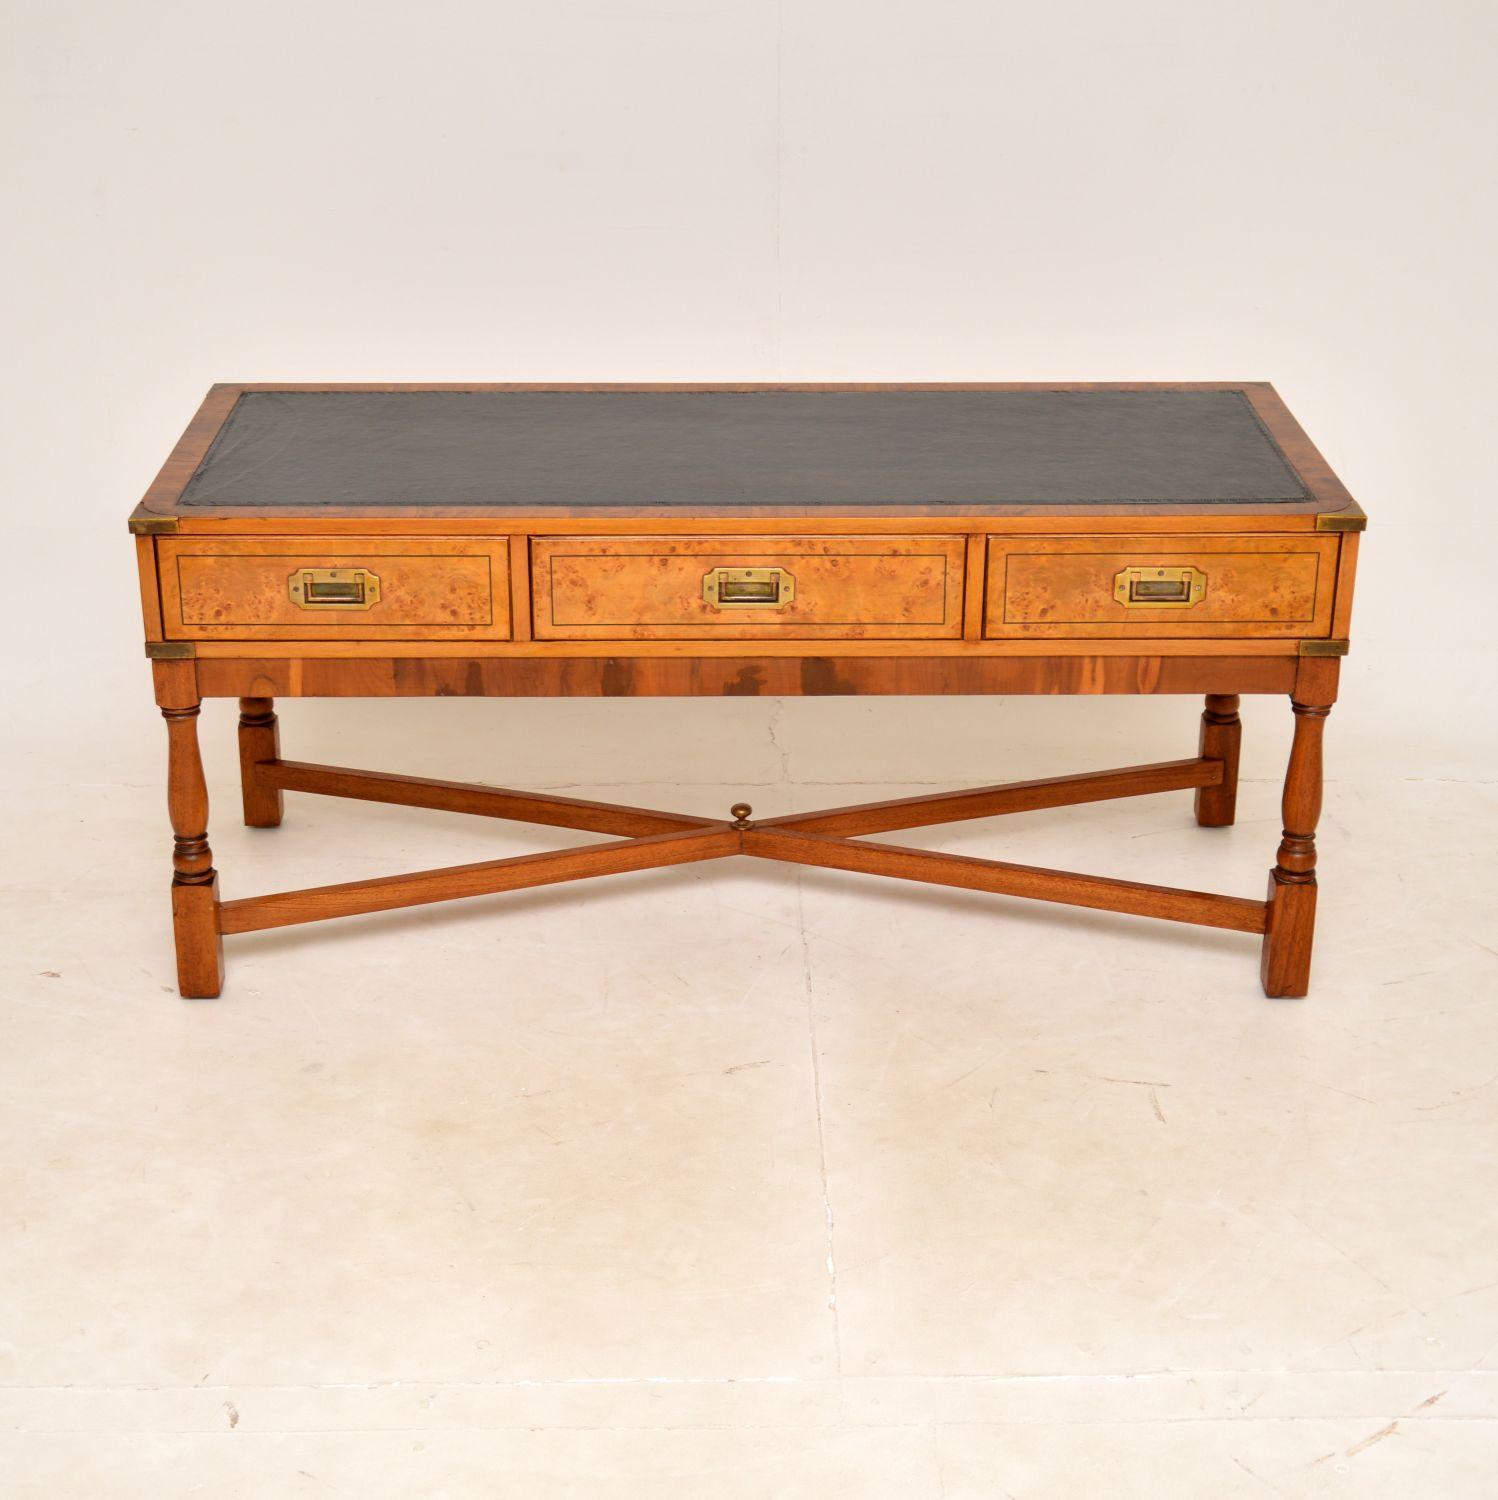 A smart and impressive antique leather top coffee table in the military campaign style. This was made in England, it dates from around the 1950’s.

It is a great size and is of amazing quality. It is predominantly yew wood, with burr walnut drawer